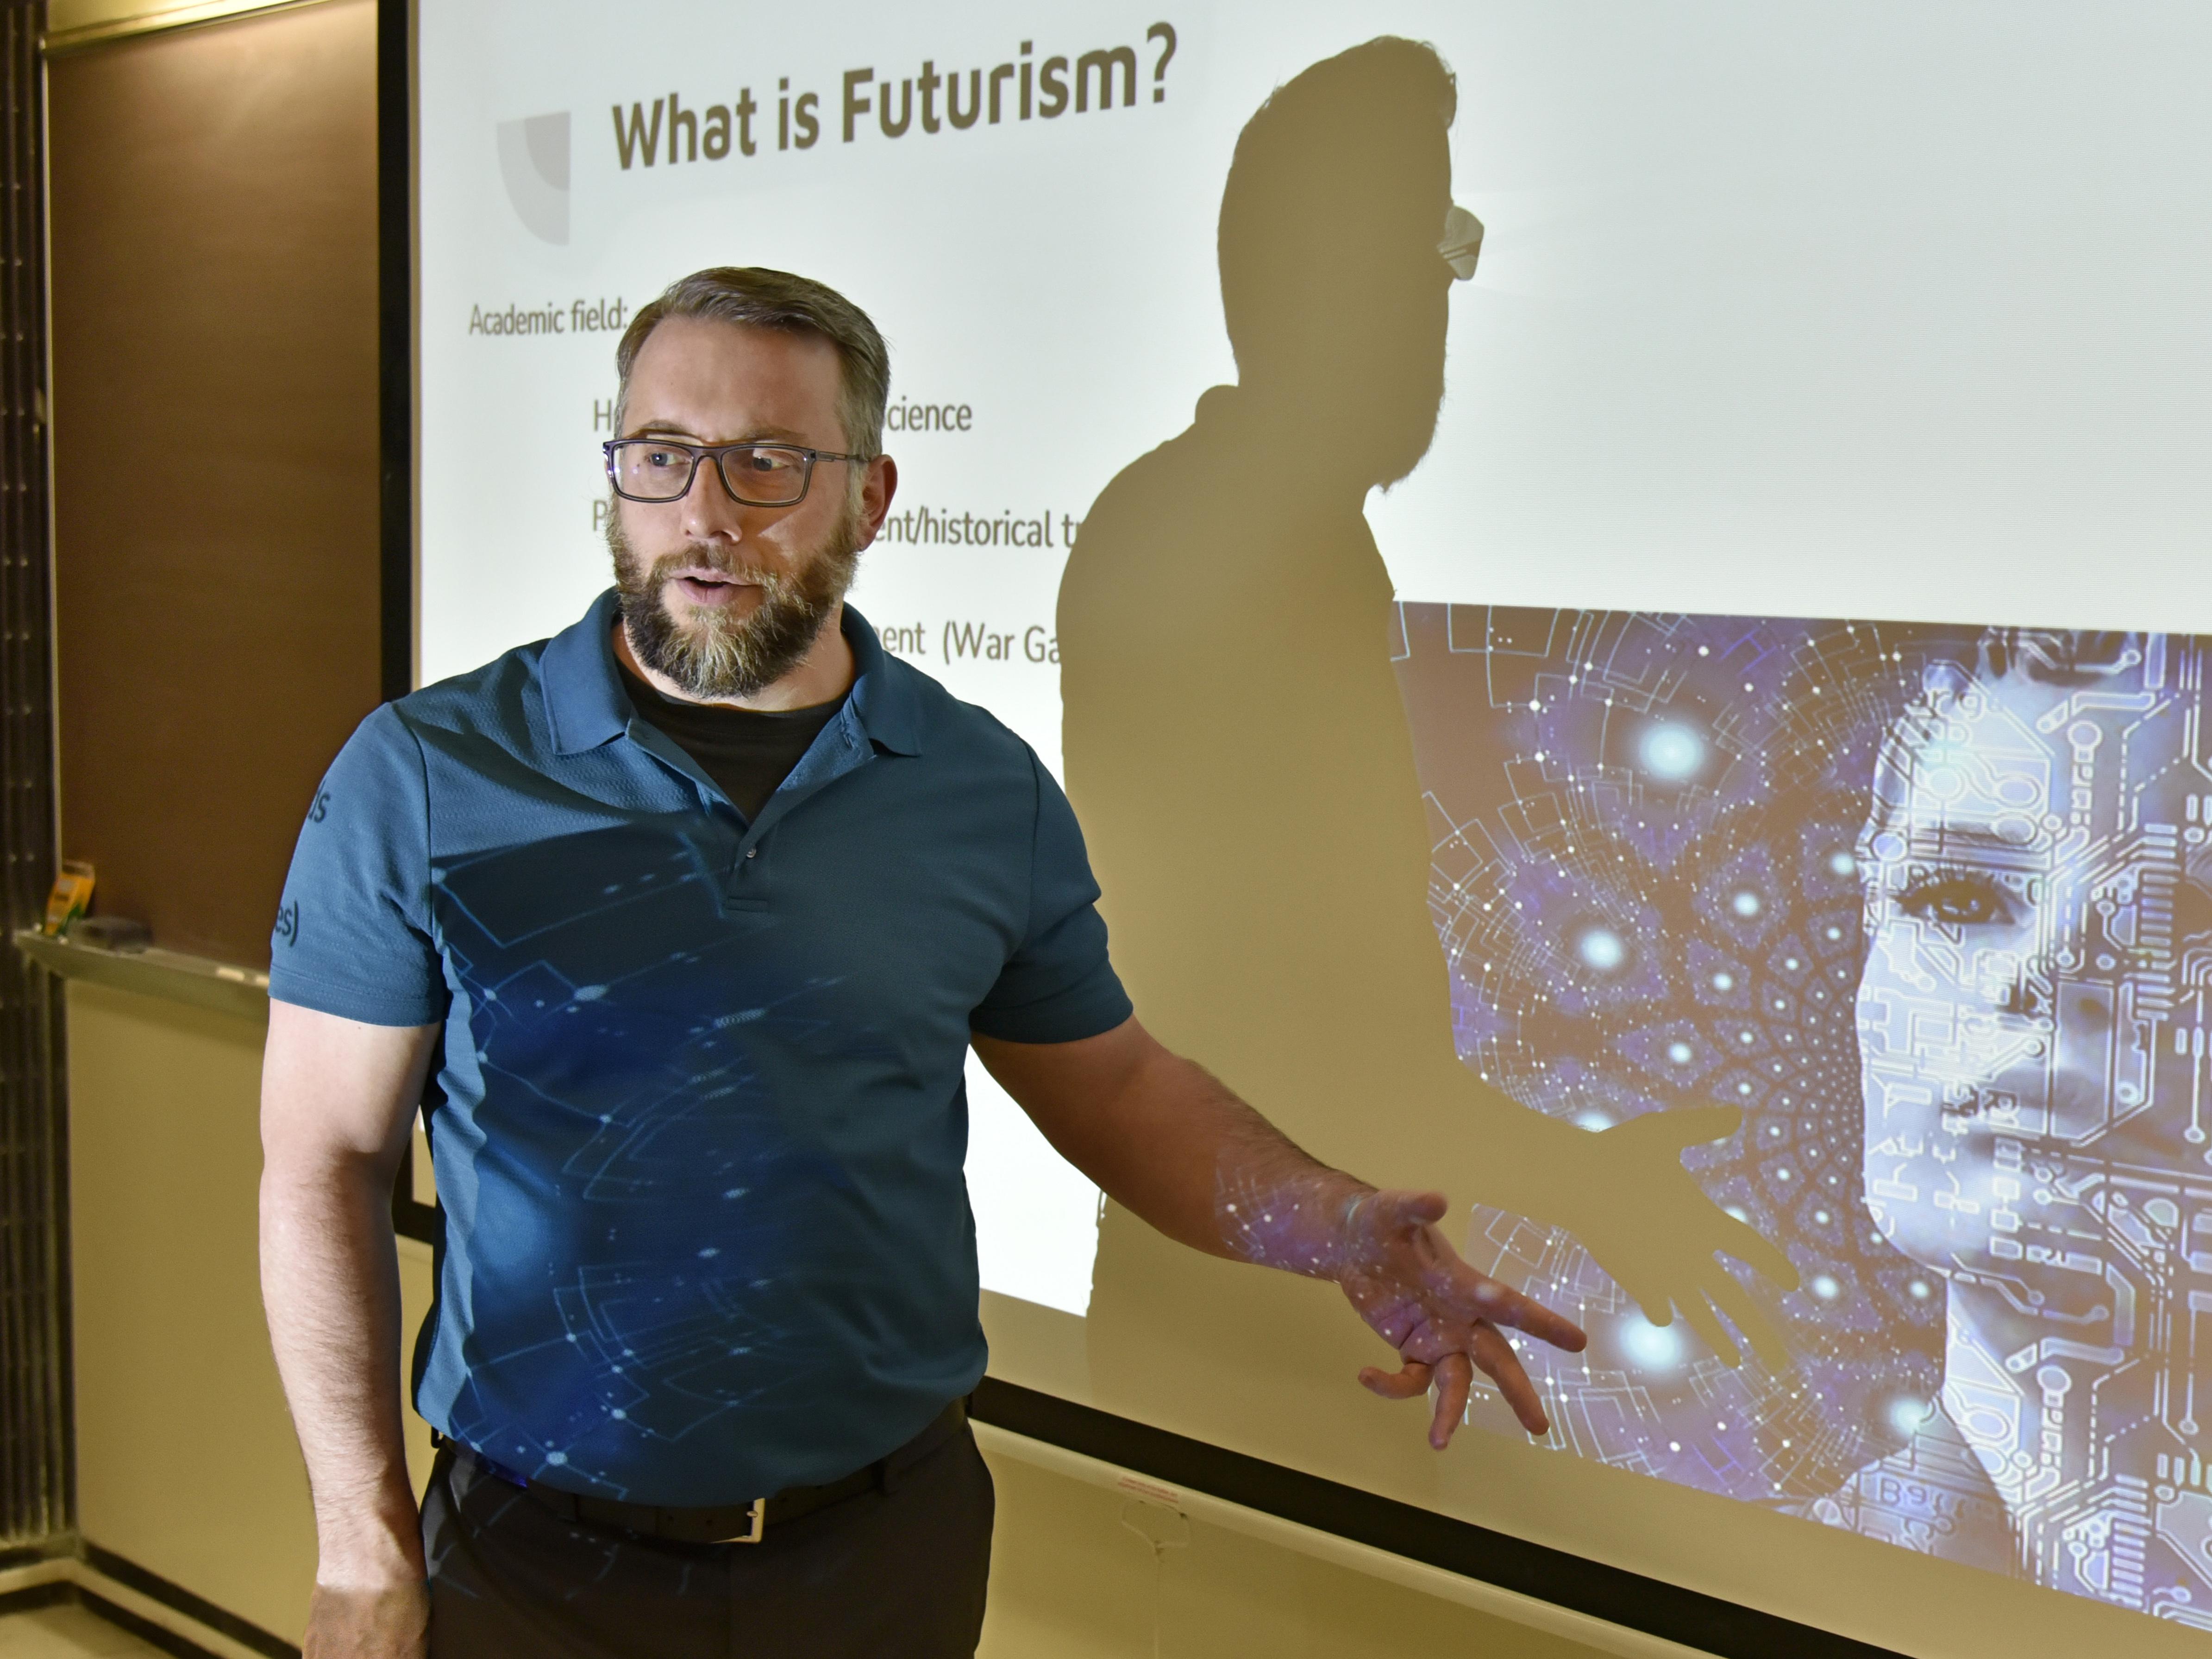 Jason Zenor teaching about futurism, connecting with his expertise on legal and ethical issues related to artificial intelligence